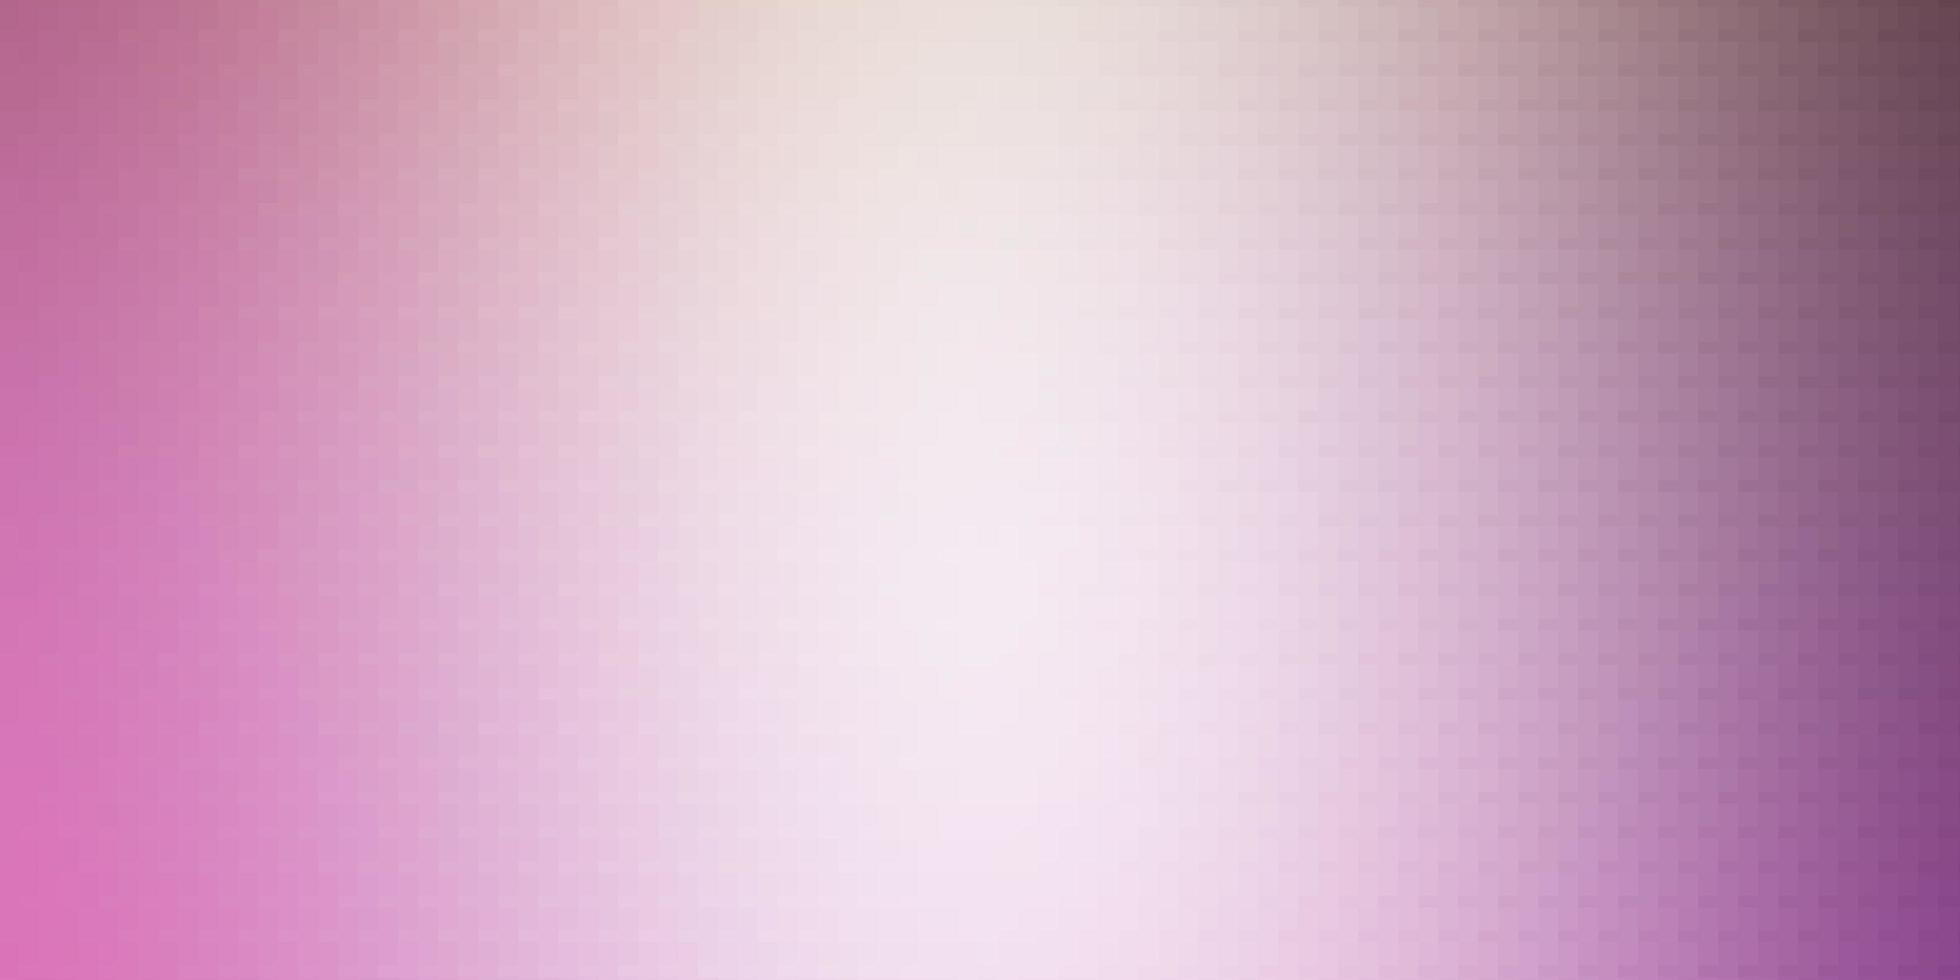 Light Pink, Green vector template with rectangles.